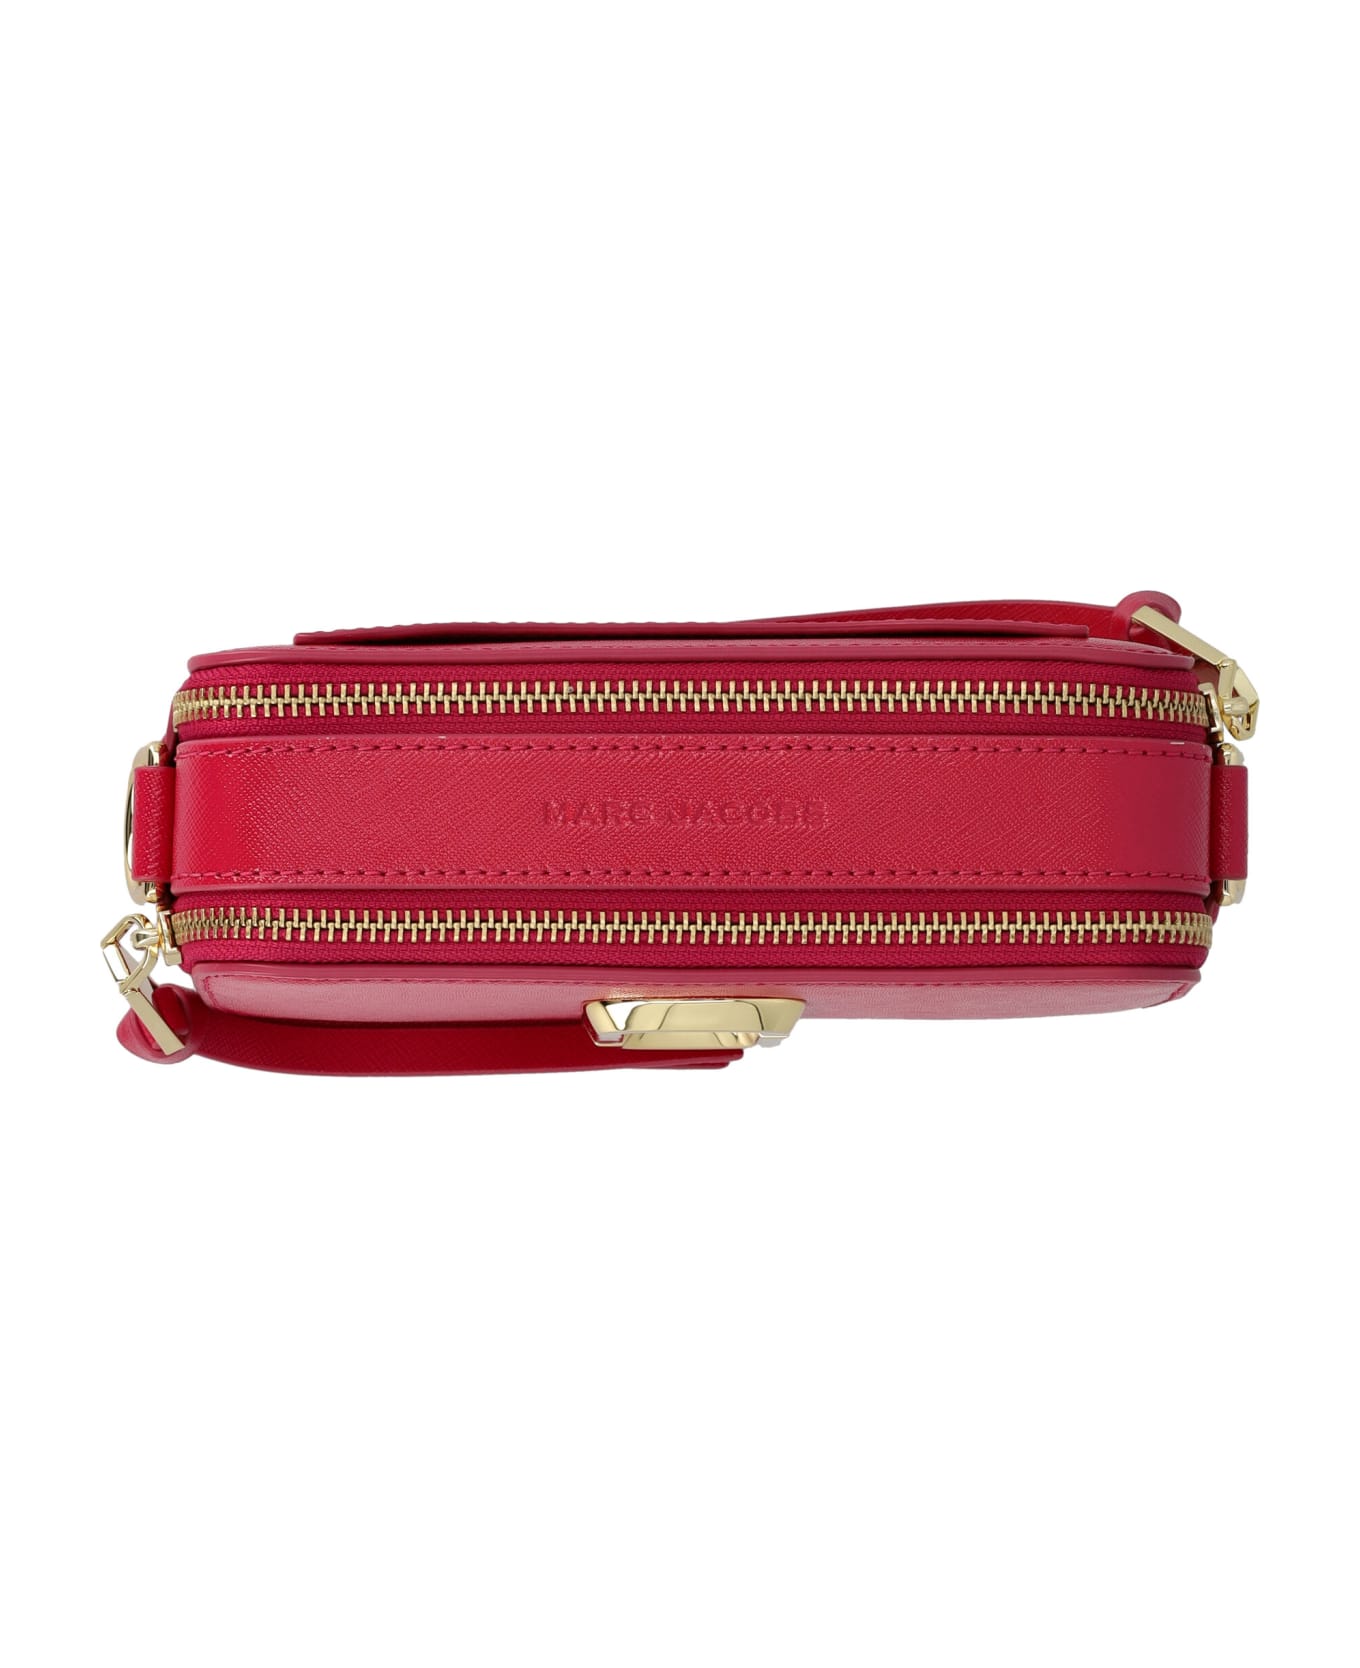 Marc Jacobs The Utility Snapshot - LIPSTICK PINK